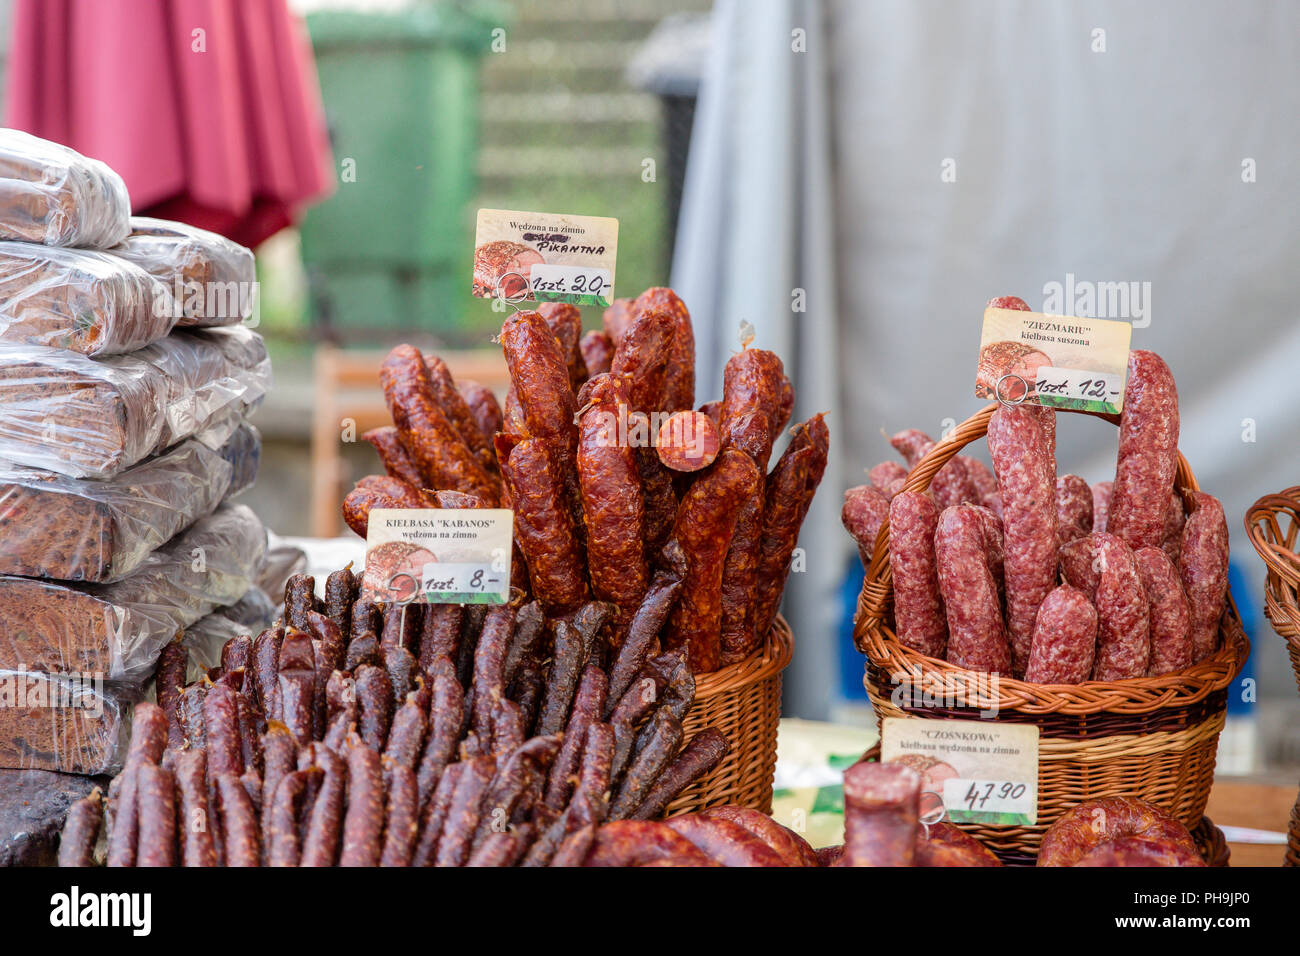 Market stall with traditional Lithuanian smoked and dried sausages at the street market in Krosno, Poland Stock Photo